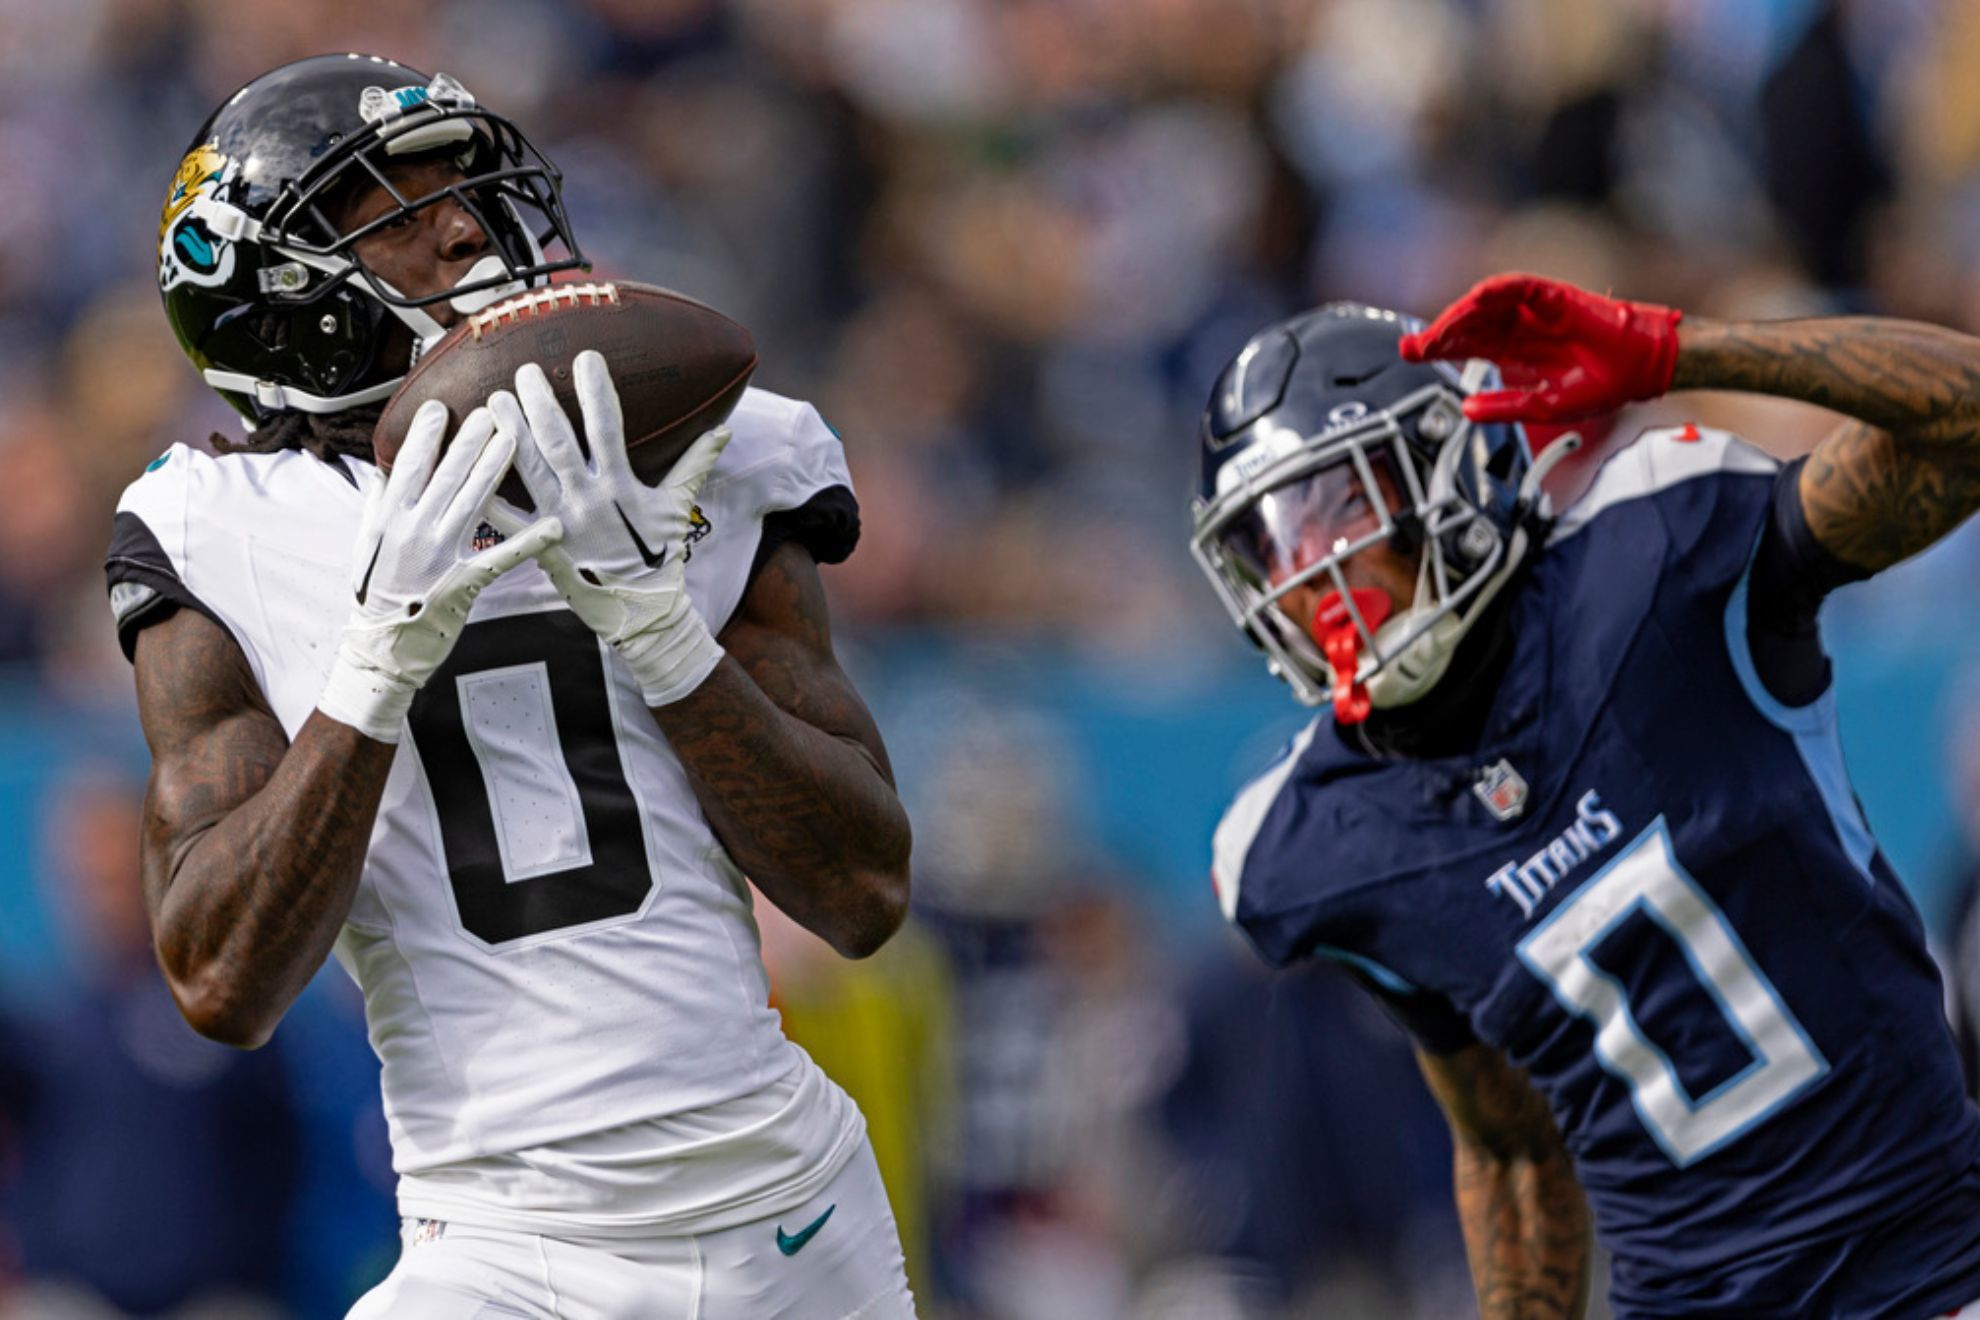 The Titans splurged on the wide receiver